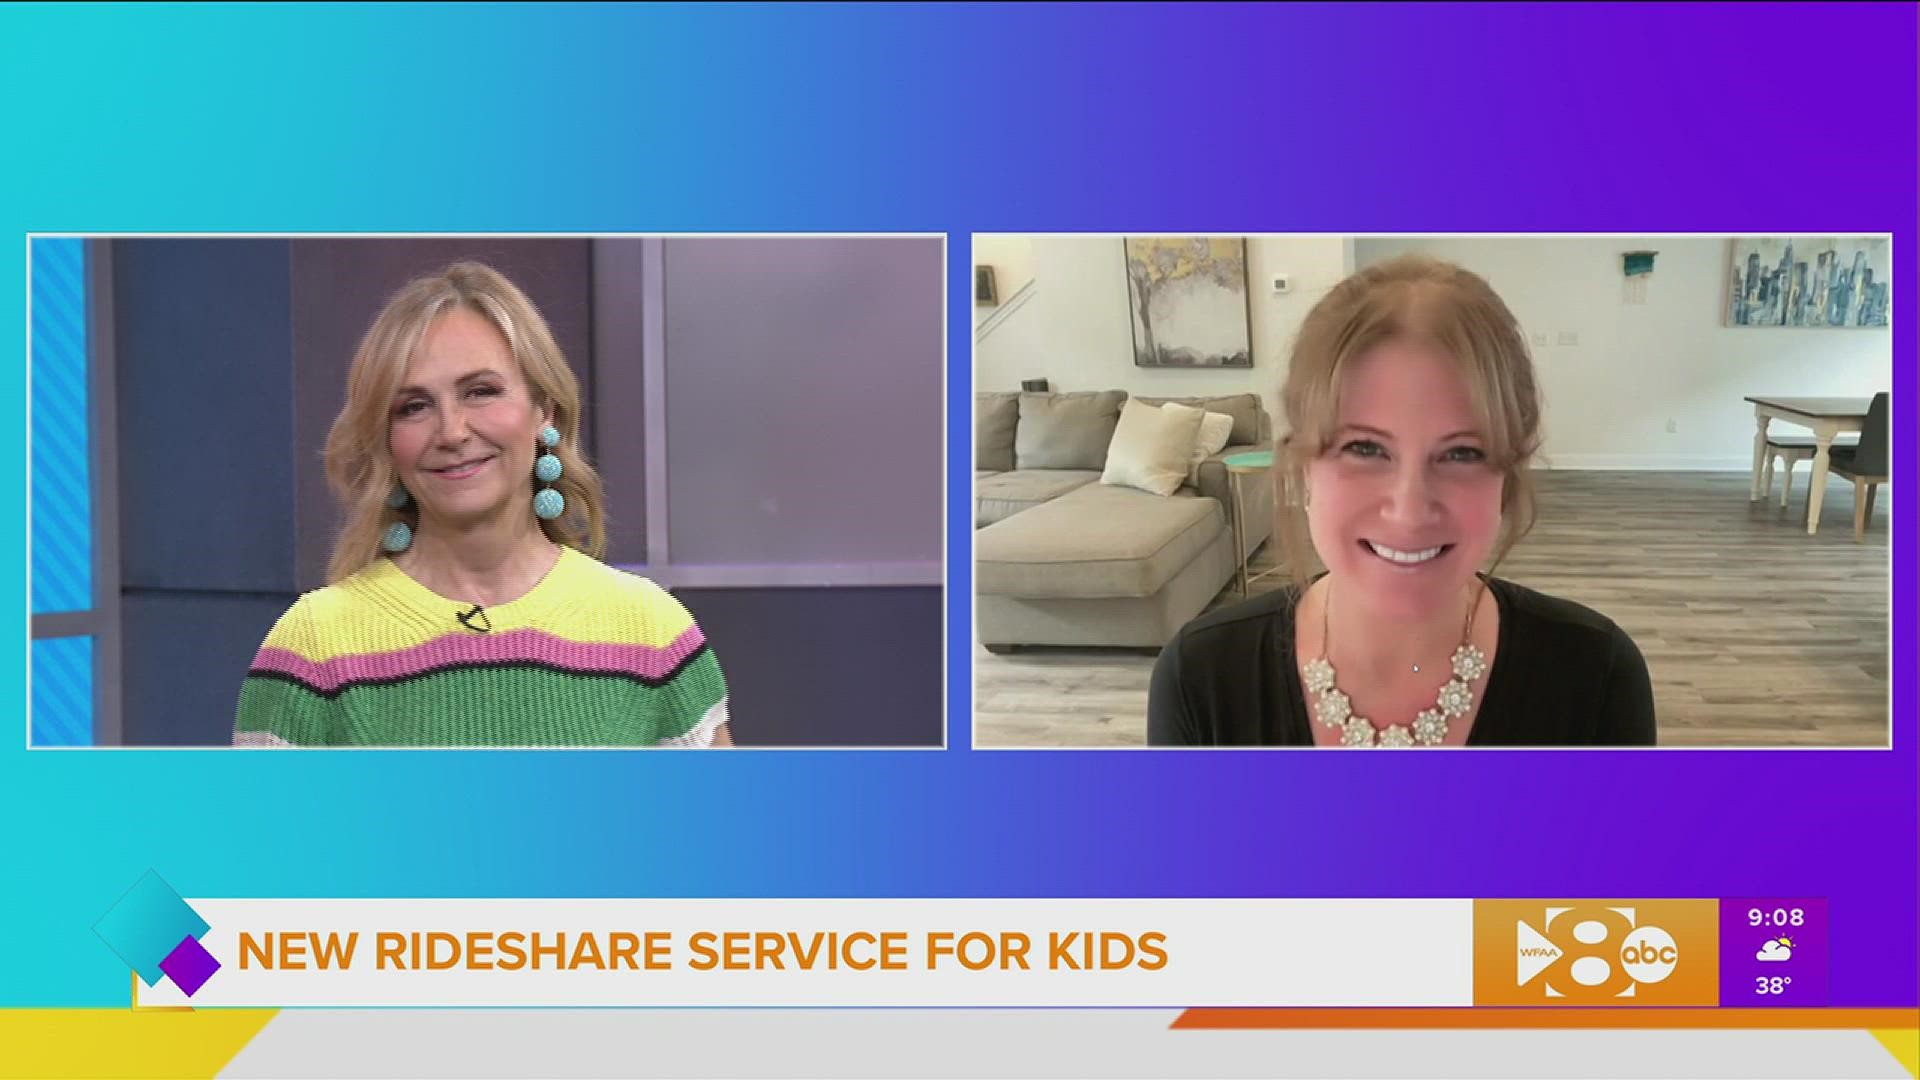 Catch some rest while your kiddo is taking a spin! We find out more about a rideshare service just for kids.